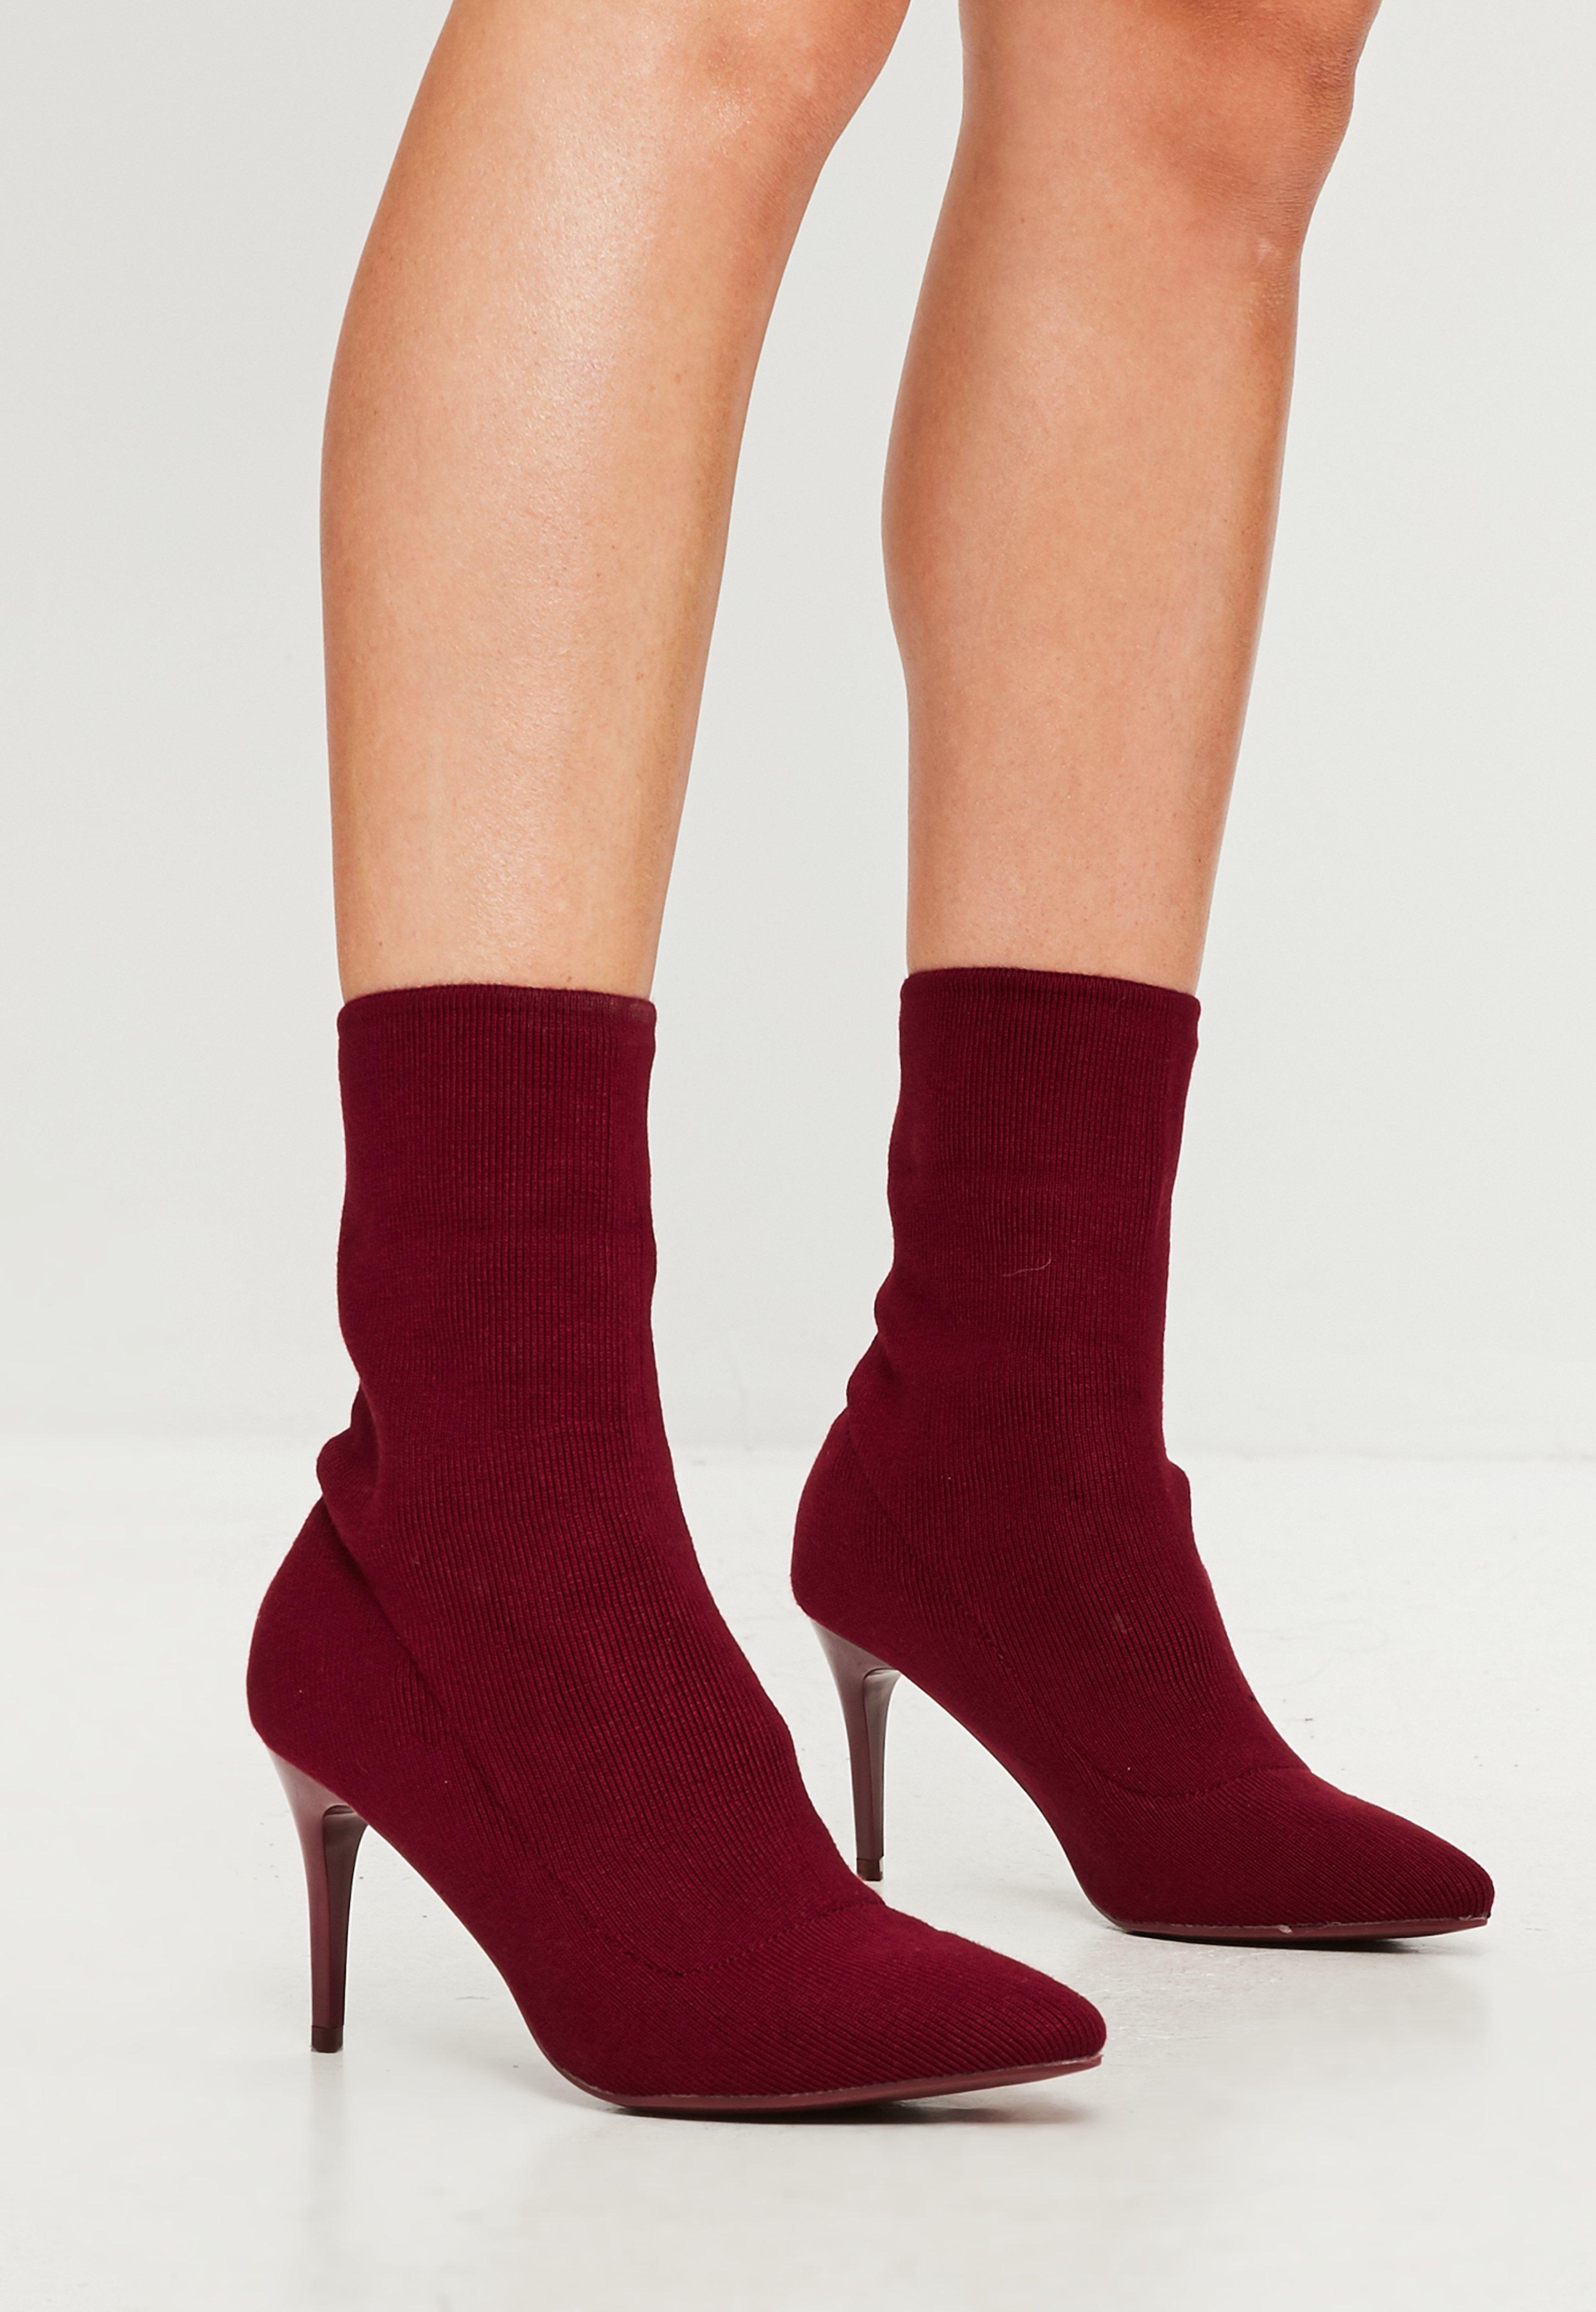 Lyst - Missguided Burgundy Ribbed Pointy Ankle Boots in Red